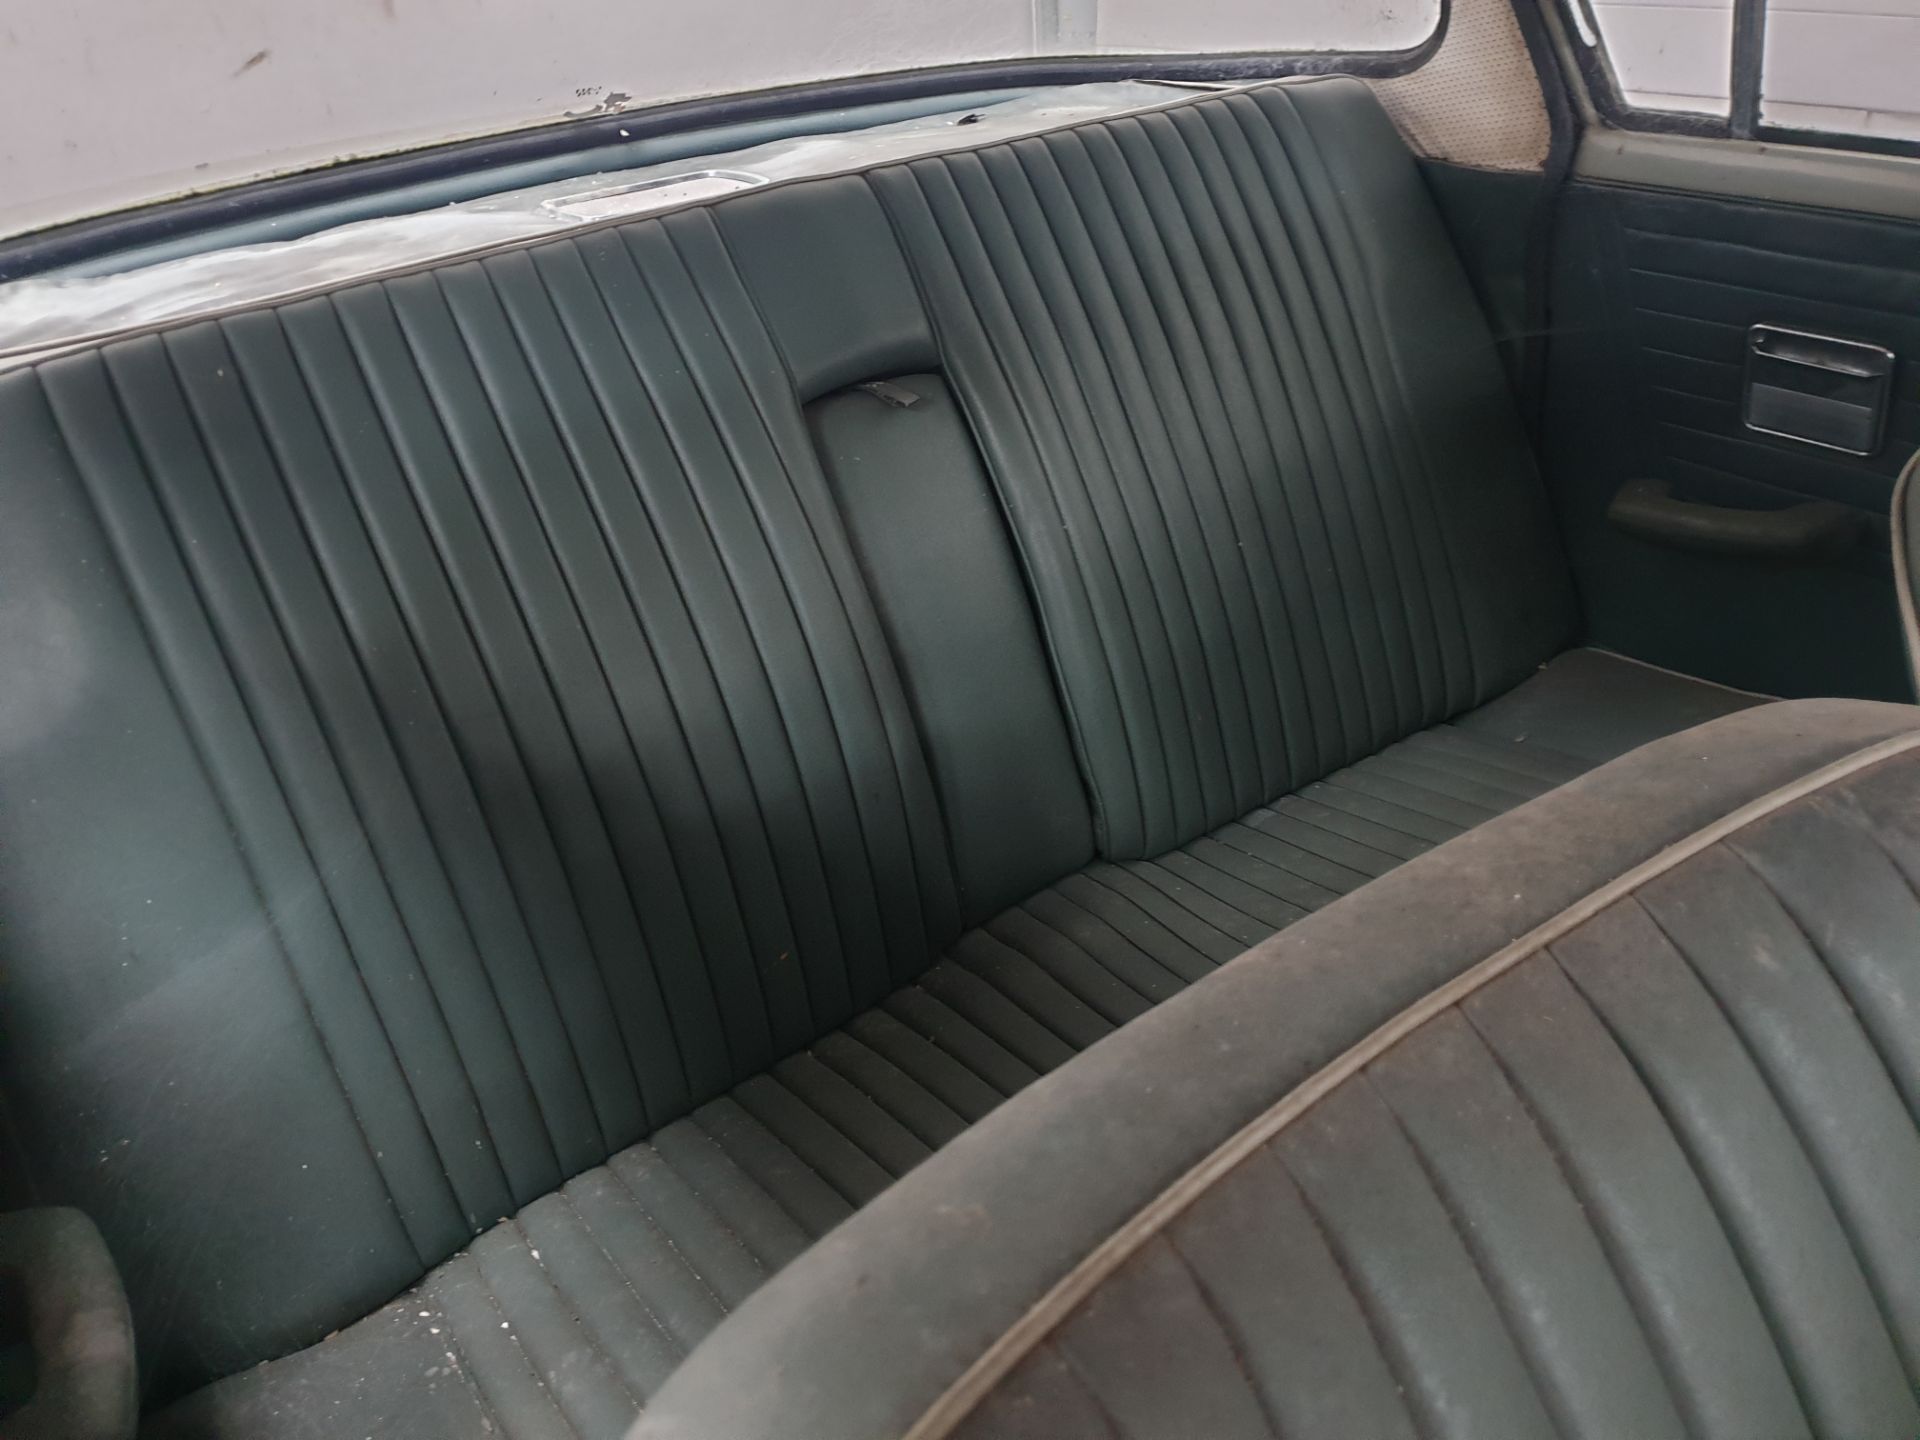 Humber Sceptre - Image 11 of 15